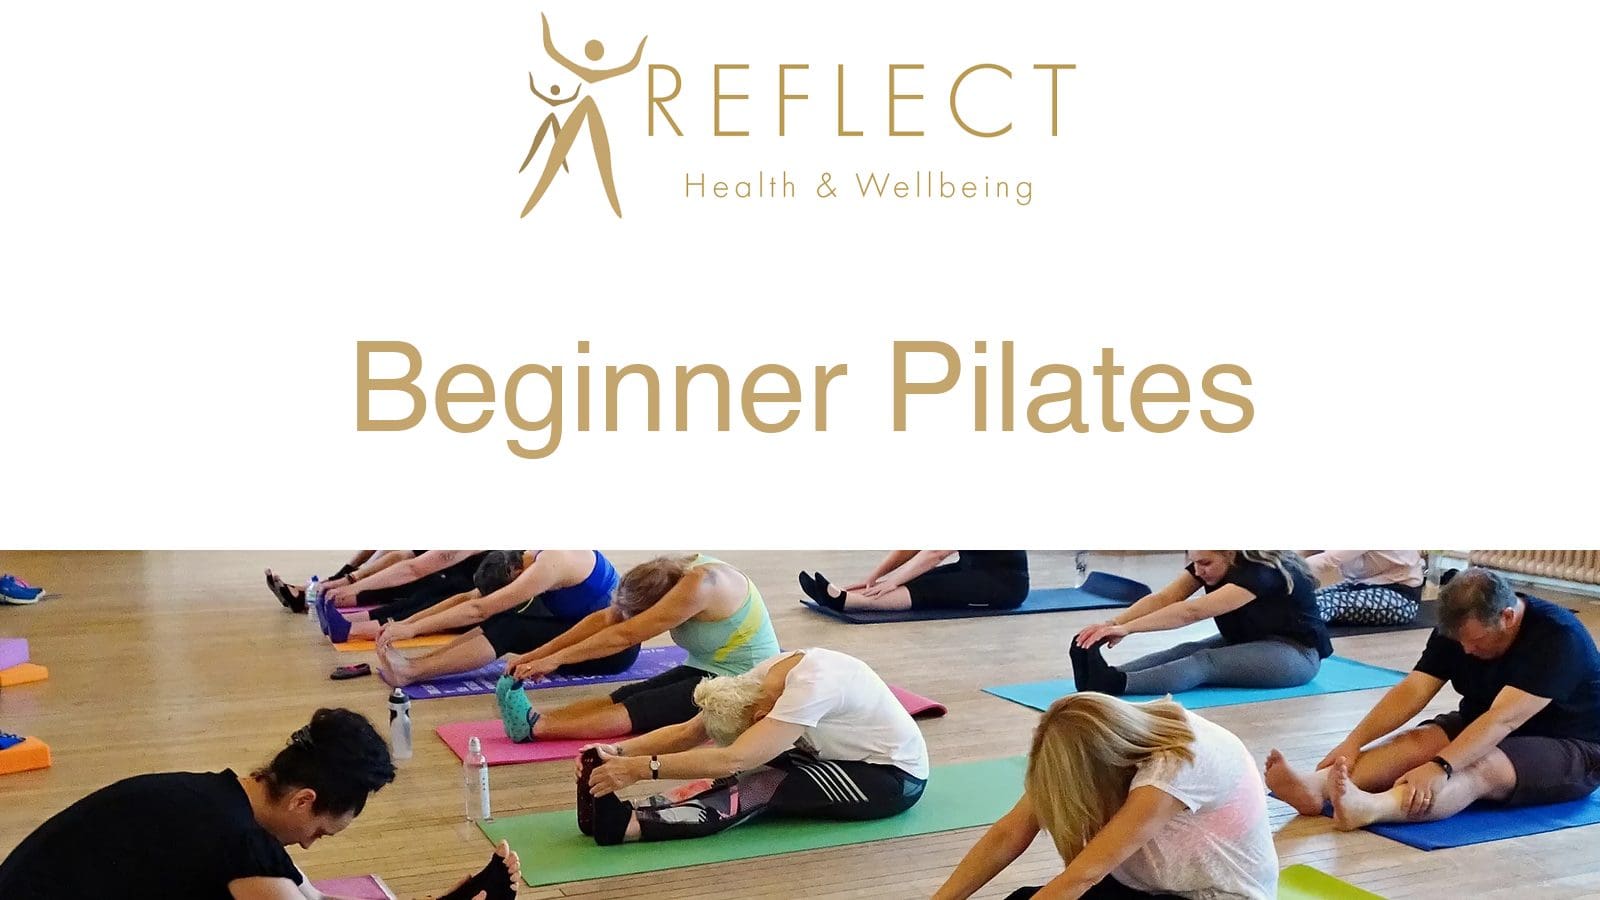 Beginner Pilates with Reflect Health and Wellbeing - Thetford Bubbly Hub